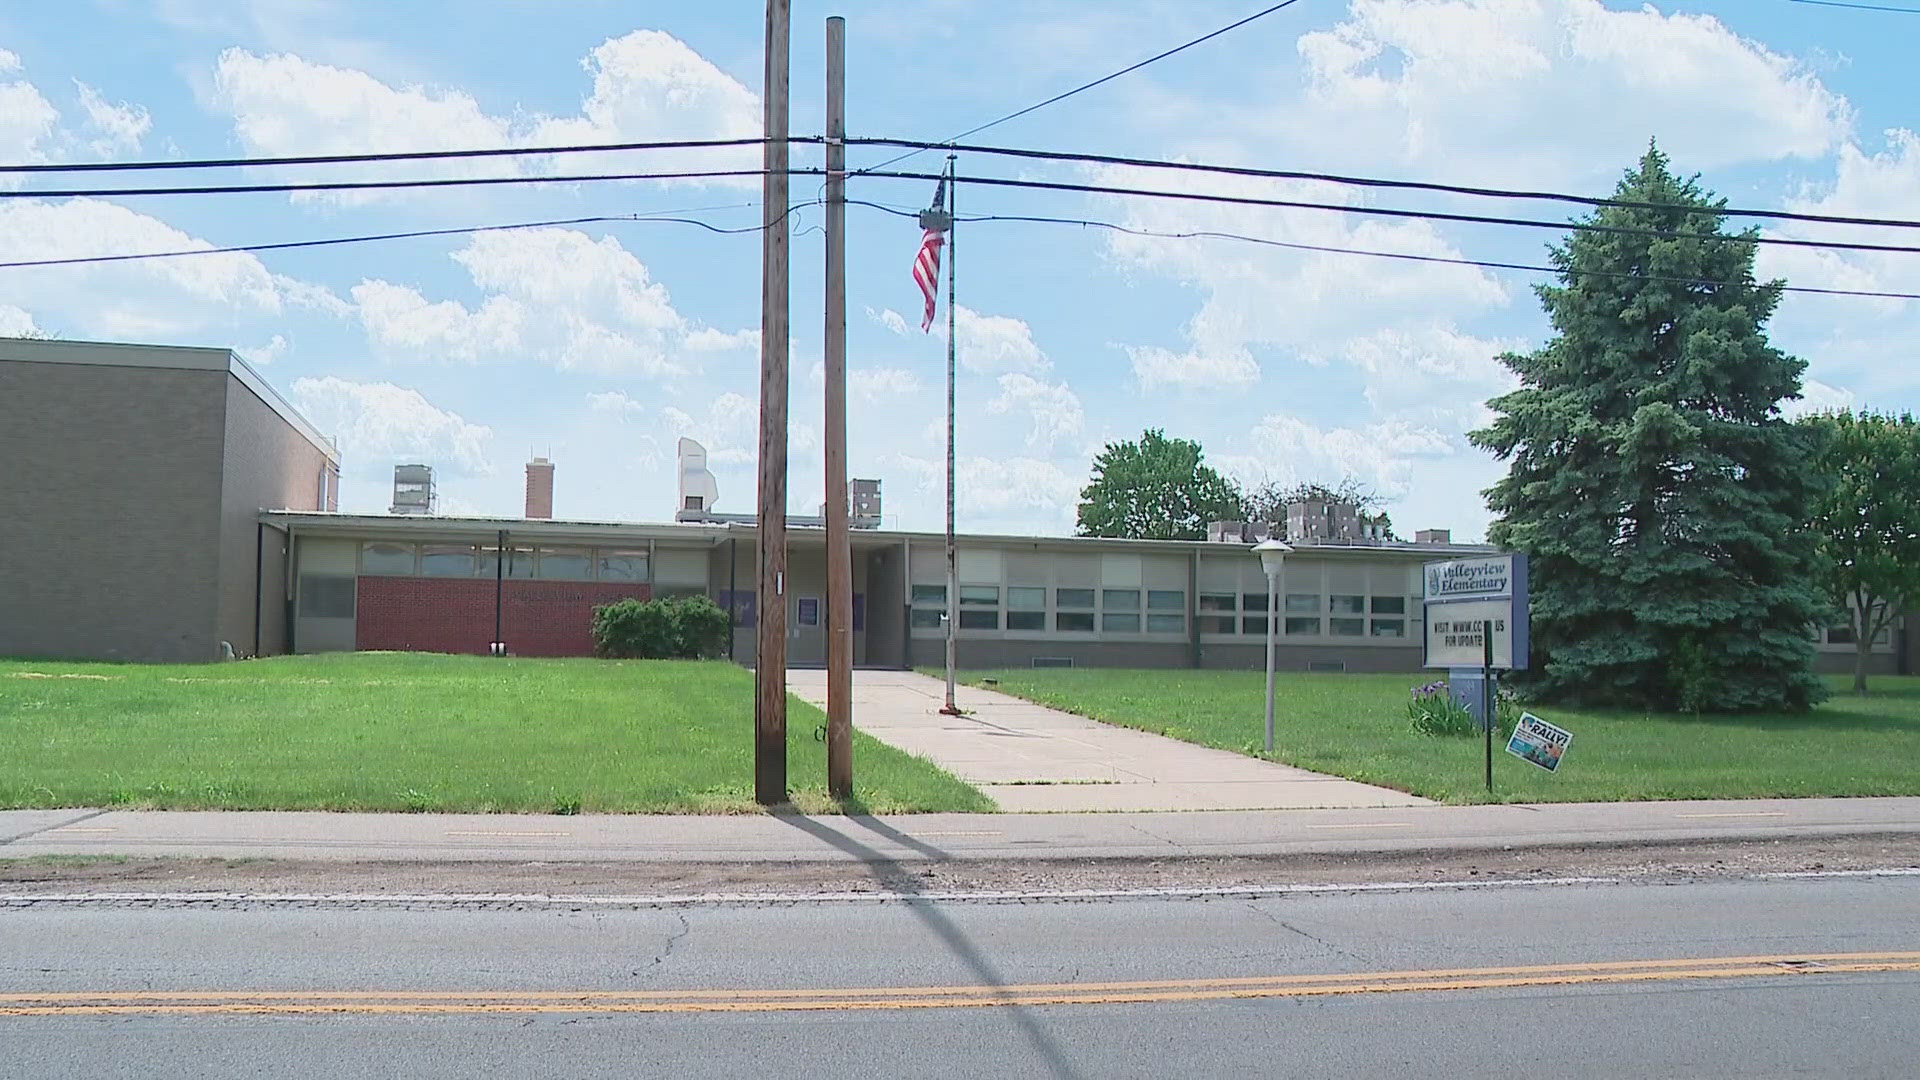 Columbus City Schools planned to close and consolidate some school buildings prior to the levy passing last year.